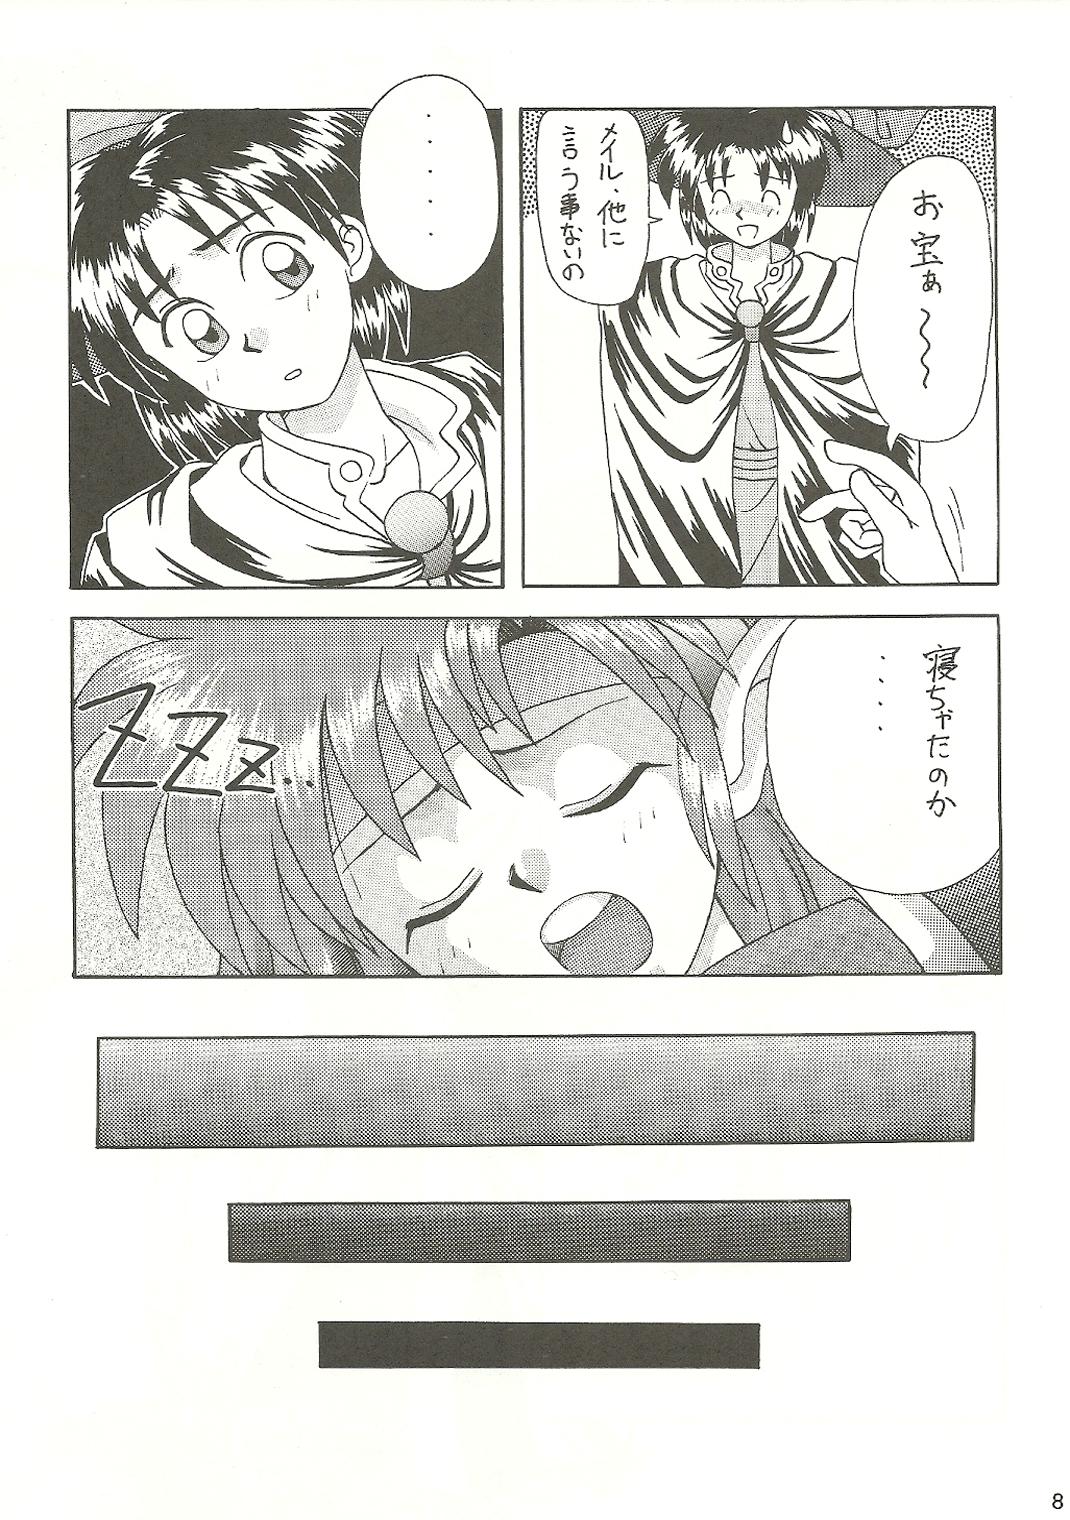 Penetration R URABON 3 - Twinbee Shining force Popful mail Amatures Gone Wild - Page 7